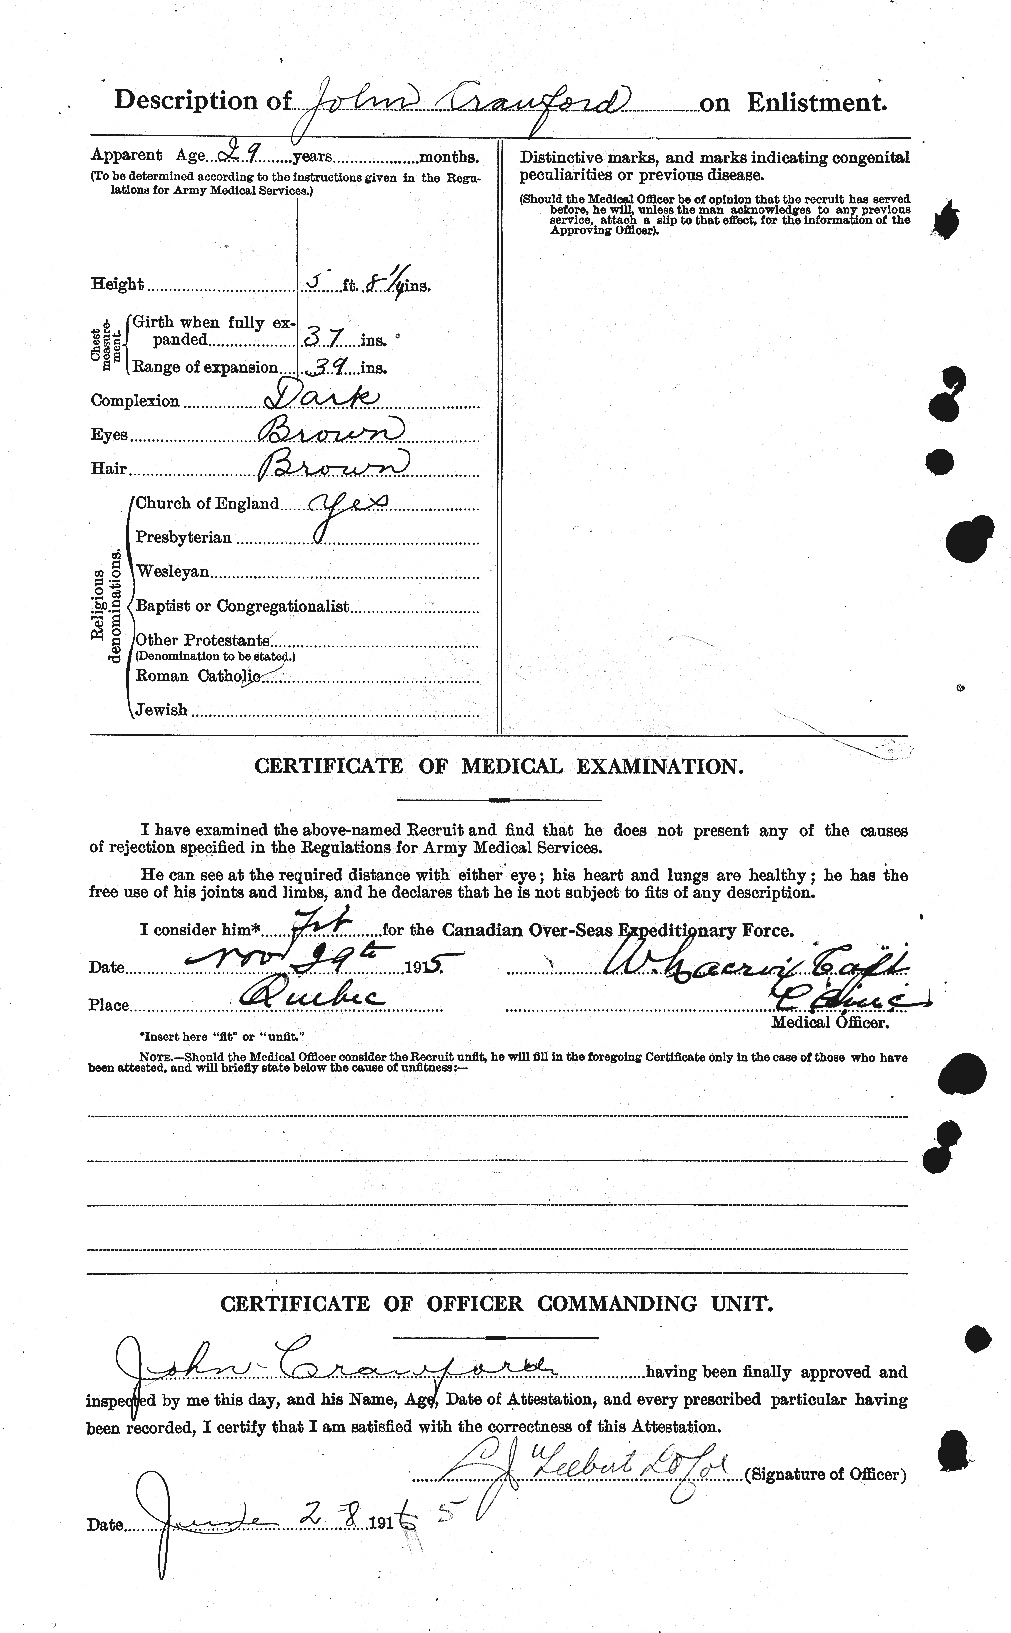 Personnel Records of the First World War - CEF 062455b